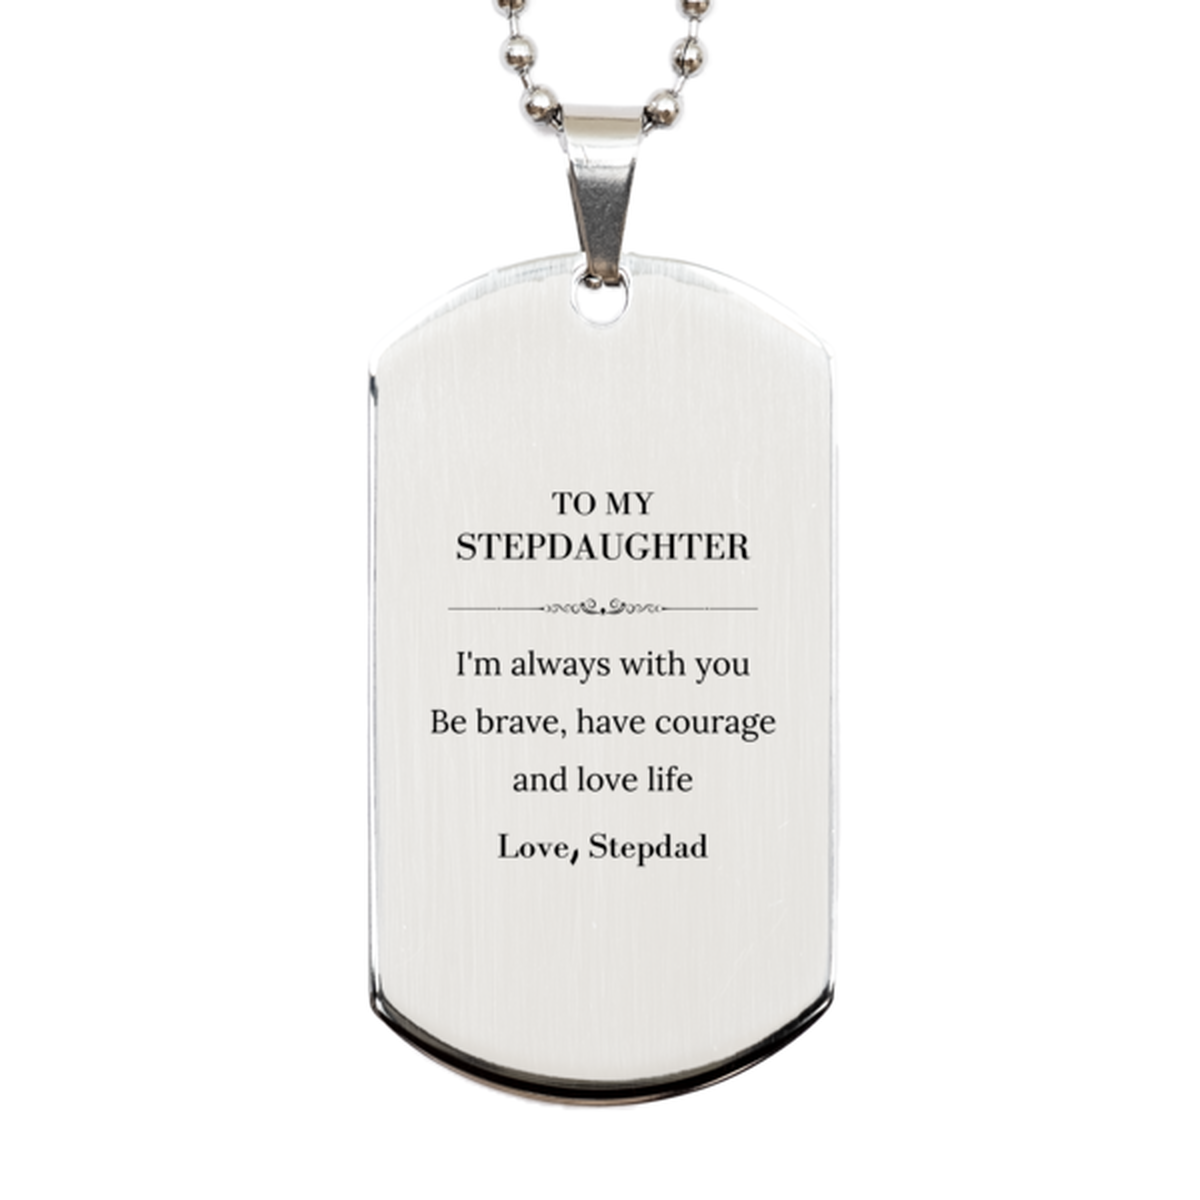 To My Stepdaughter Gifts from Stepdad, Unique Silver Dog Tag Inspirational Christmas Birthday Graduation Gifts for Stepdaughter I'm always with you. Be brave, have courage and love life. Love, Stepdad